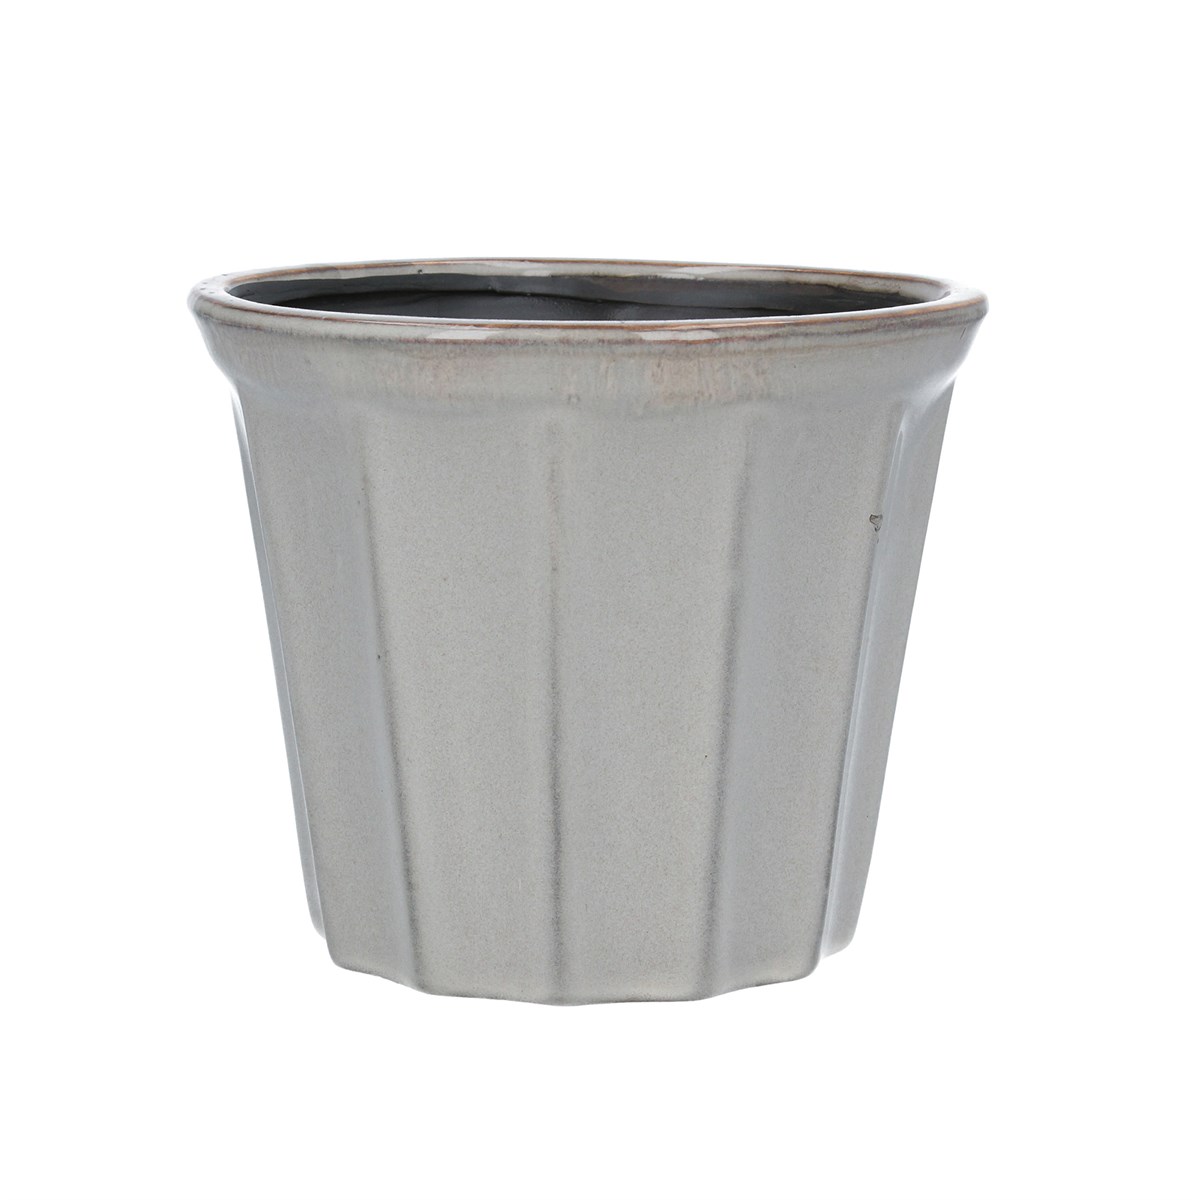 A medium taupe ceramic pot cover with all over ribbed design. The perfect addition to your home or the perfect gift for yourself or a loved one. By London designer Gisela Graham. 